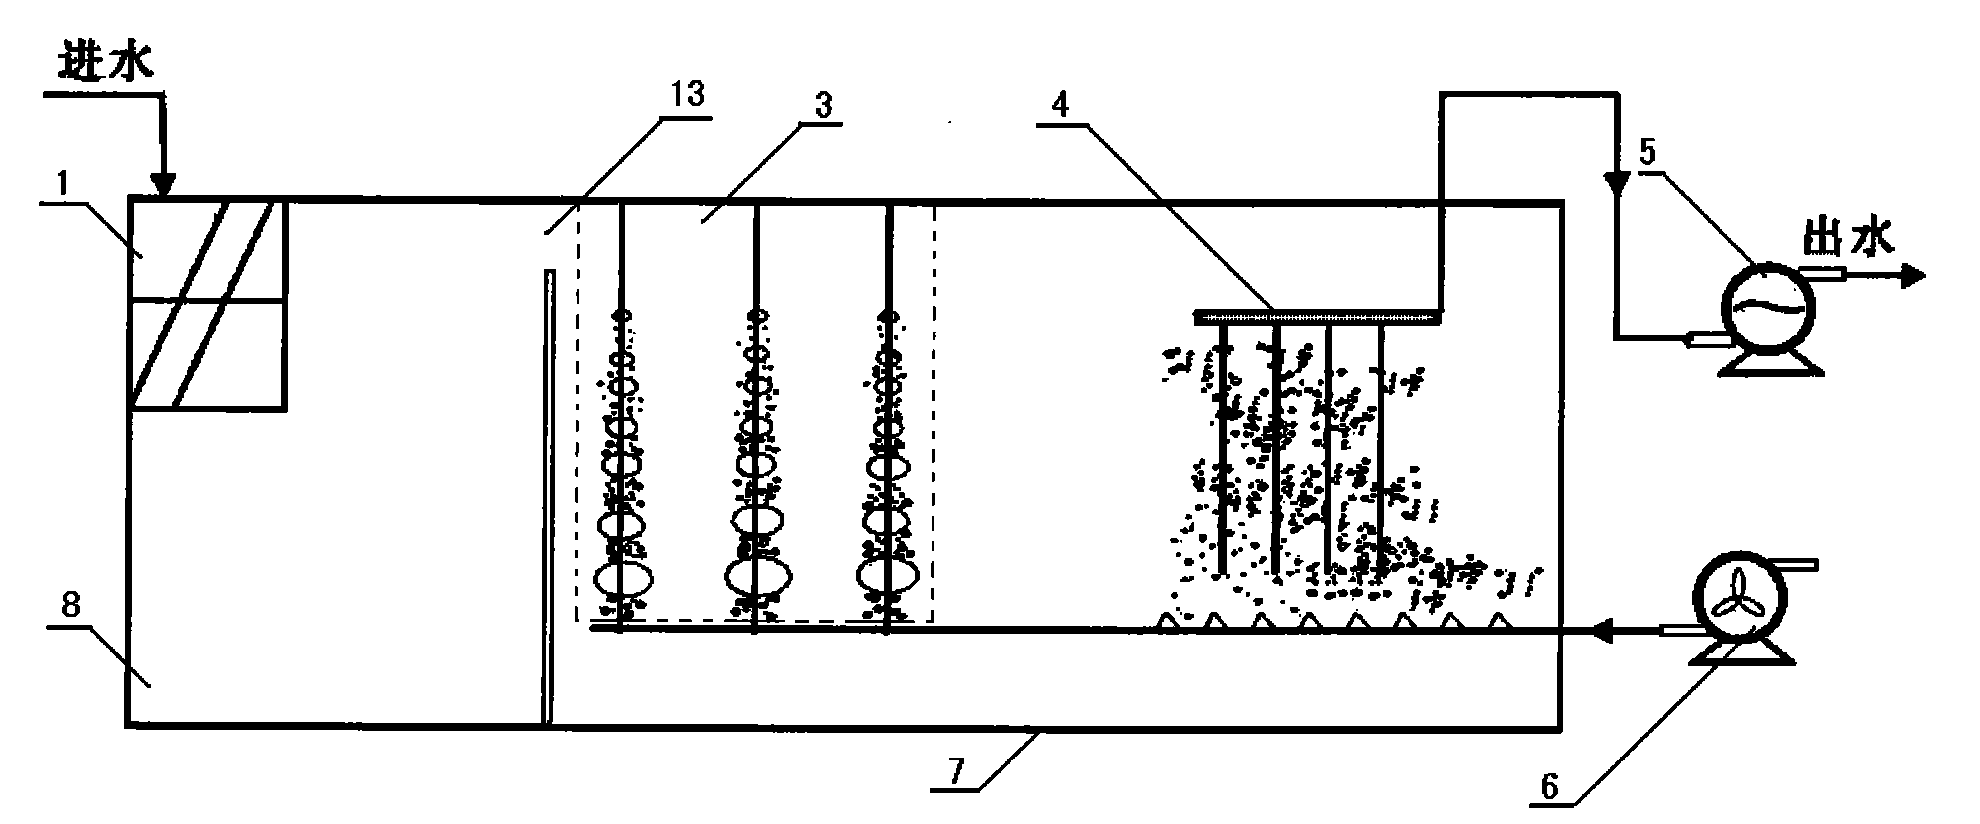 Integral MBR sewage treating and recycling method and treatment device